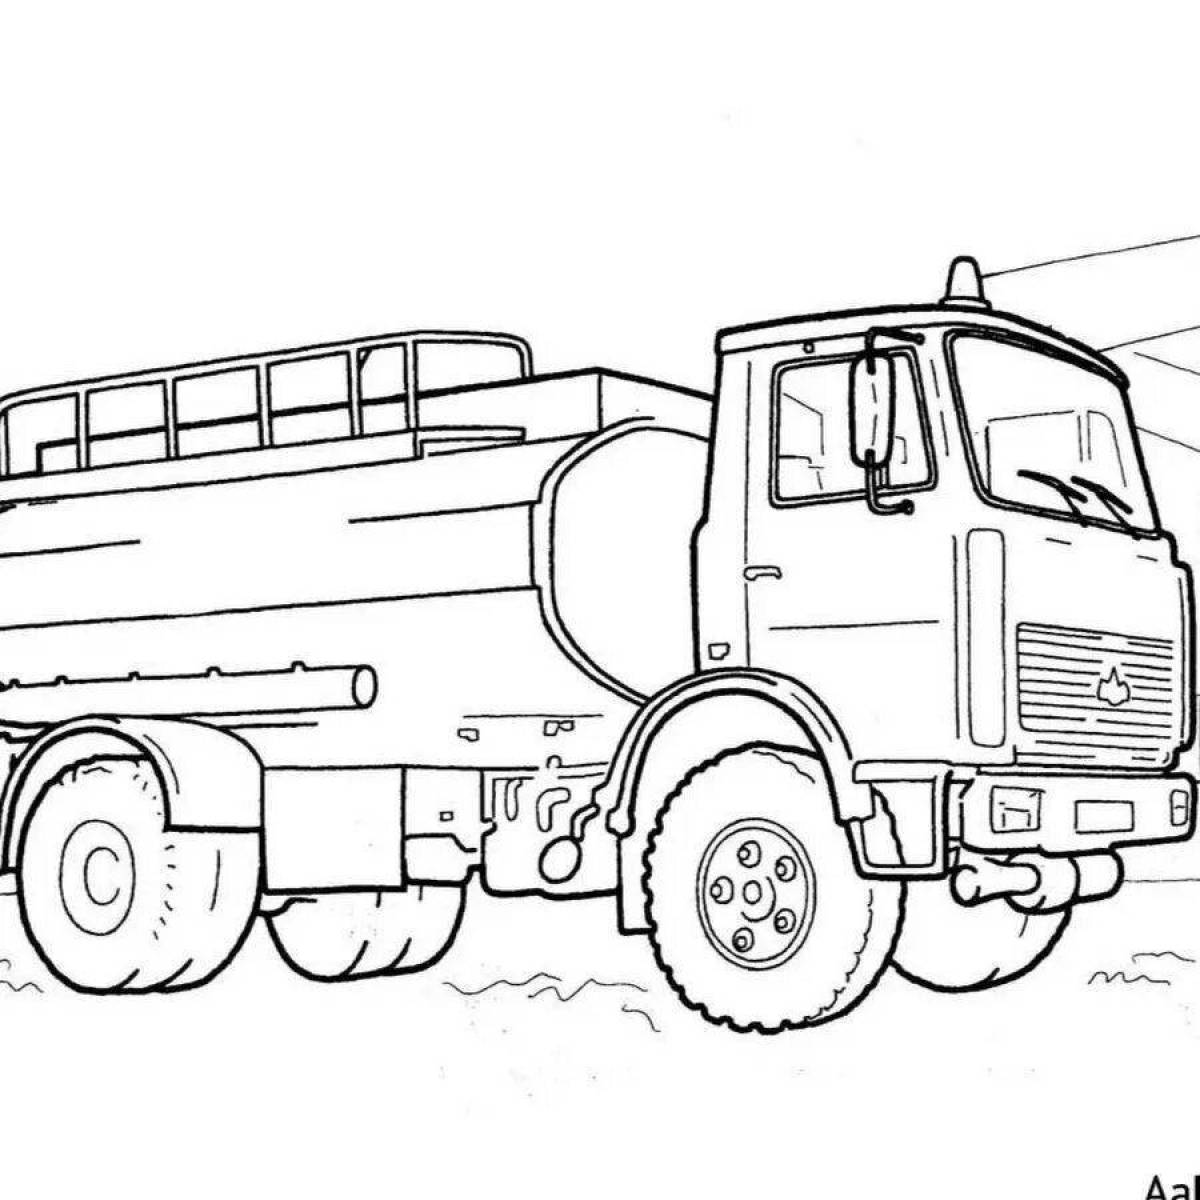 Adorable water carrier coloring page